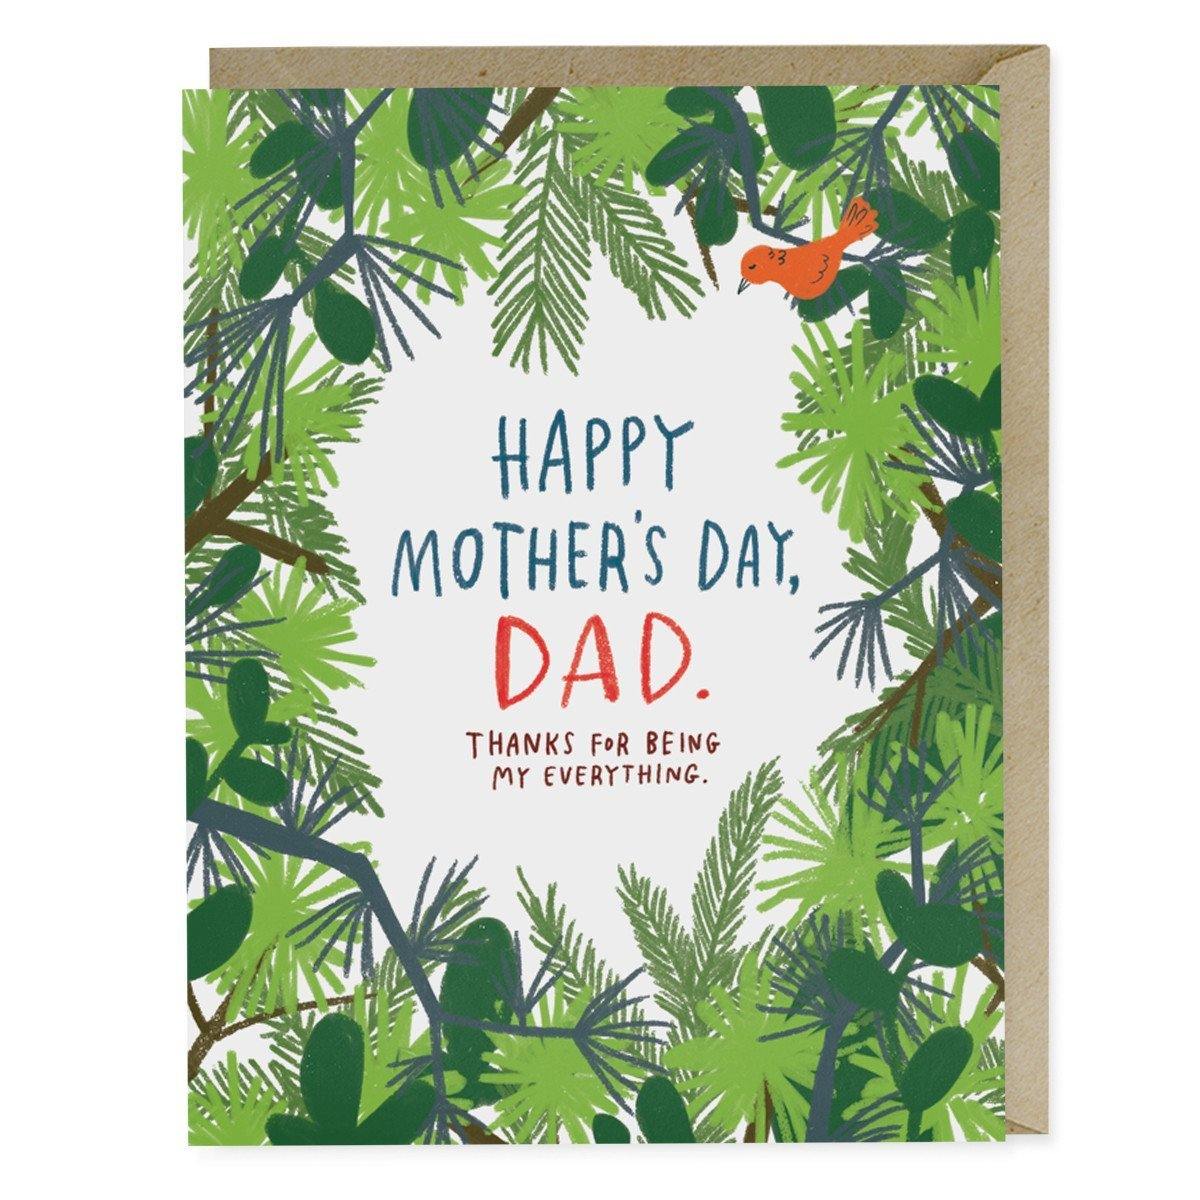 Dad Thanks For Being My Everything Mothers Day Card - Penny Black